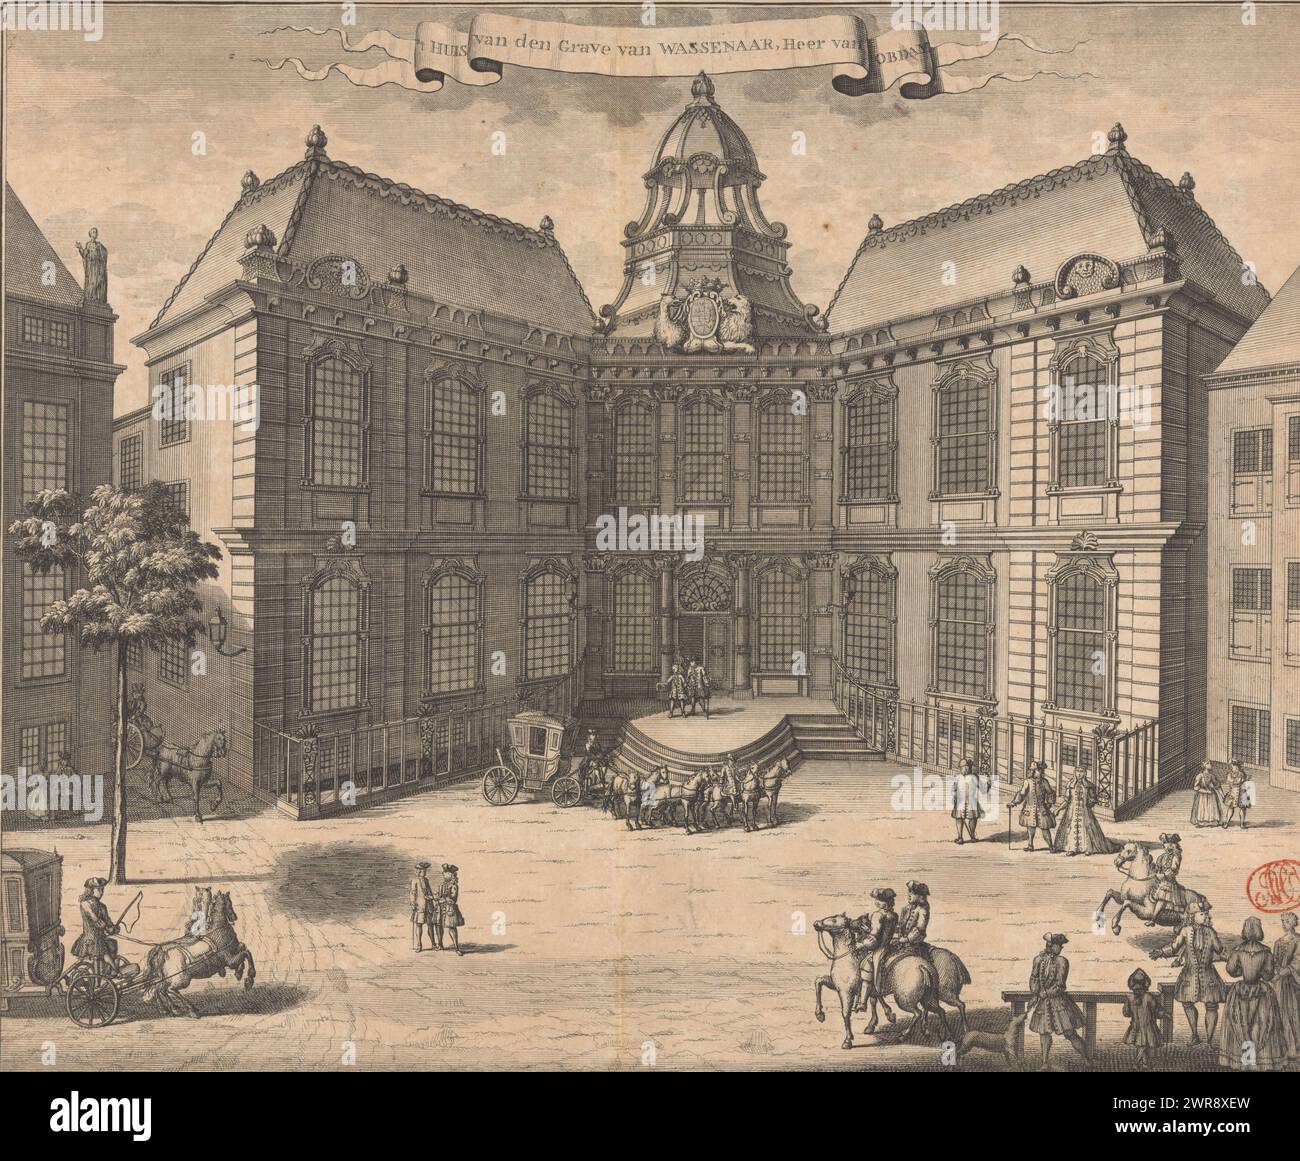 View of Kneuterdijk Palace in The Hague, 't Huis van den Grave van Wassenaer, lord of Obdam (title on object), View of Kneuterdijk Palace on Kneuterdijk in The Hague. Different figures on the street., print maker: anonymous, after drawing by: Gerrit van Giessen, publisher: Reinier Boitet, after drawing by: The Hague, publisher: Delft, publisher: Amsterdam, 1730 - 1736, paper, etching, engraving, height 285 mm × width 343 mm, print Stock Photo